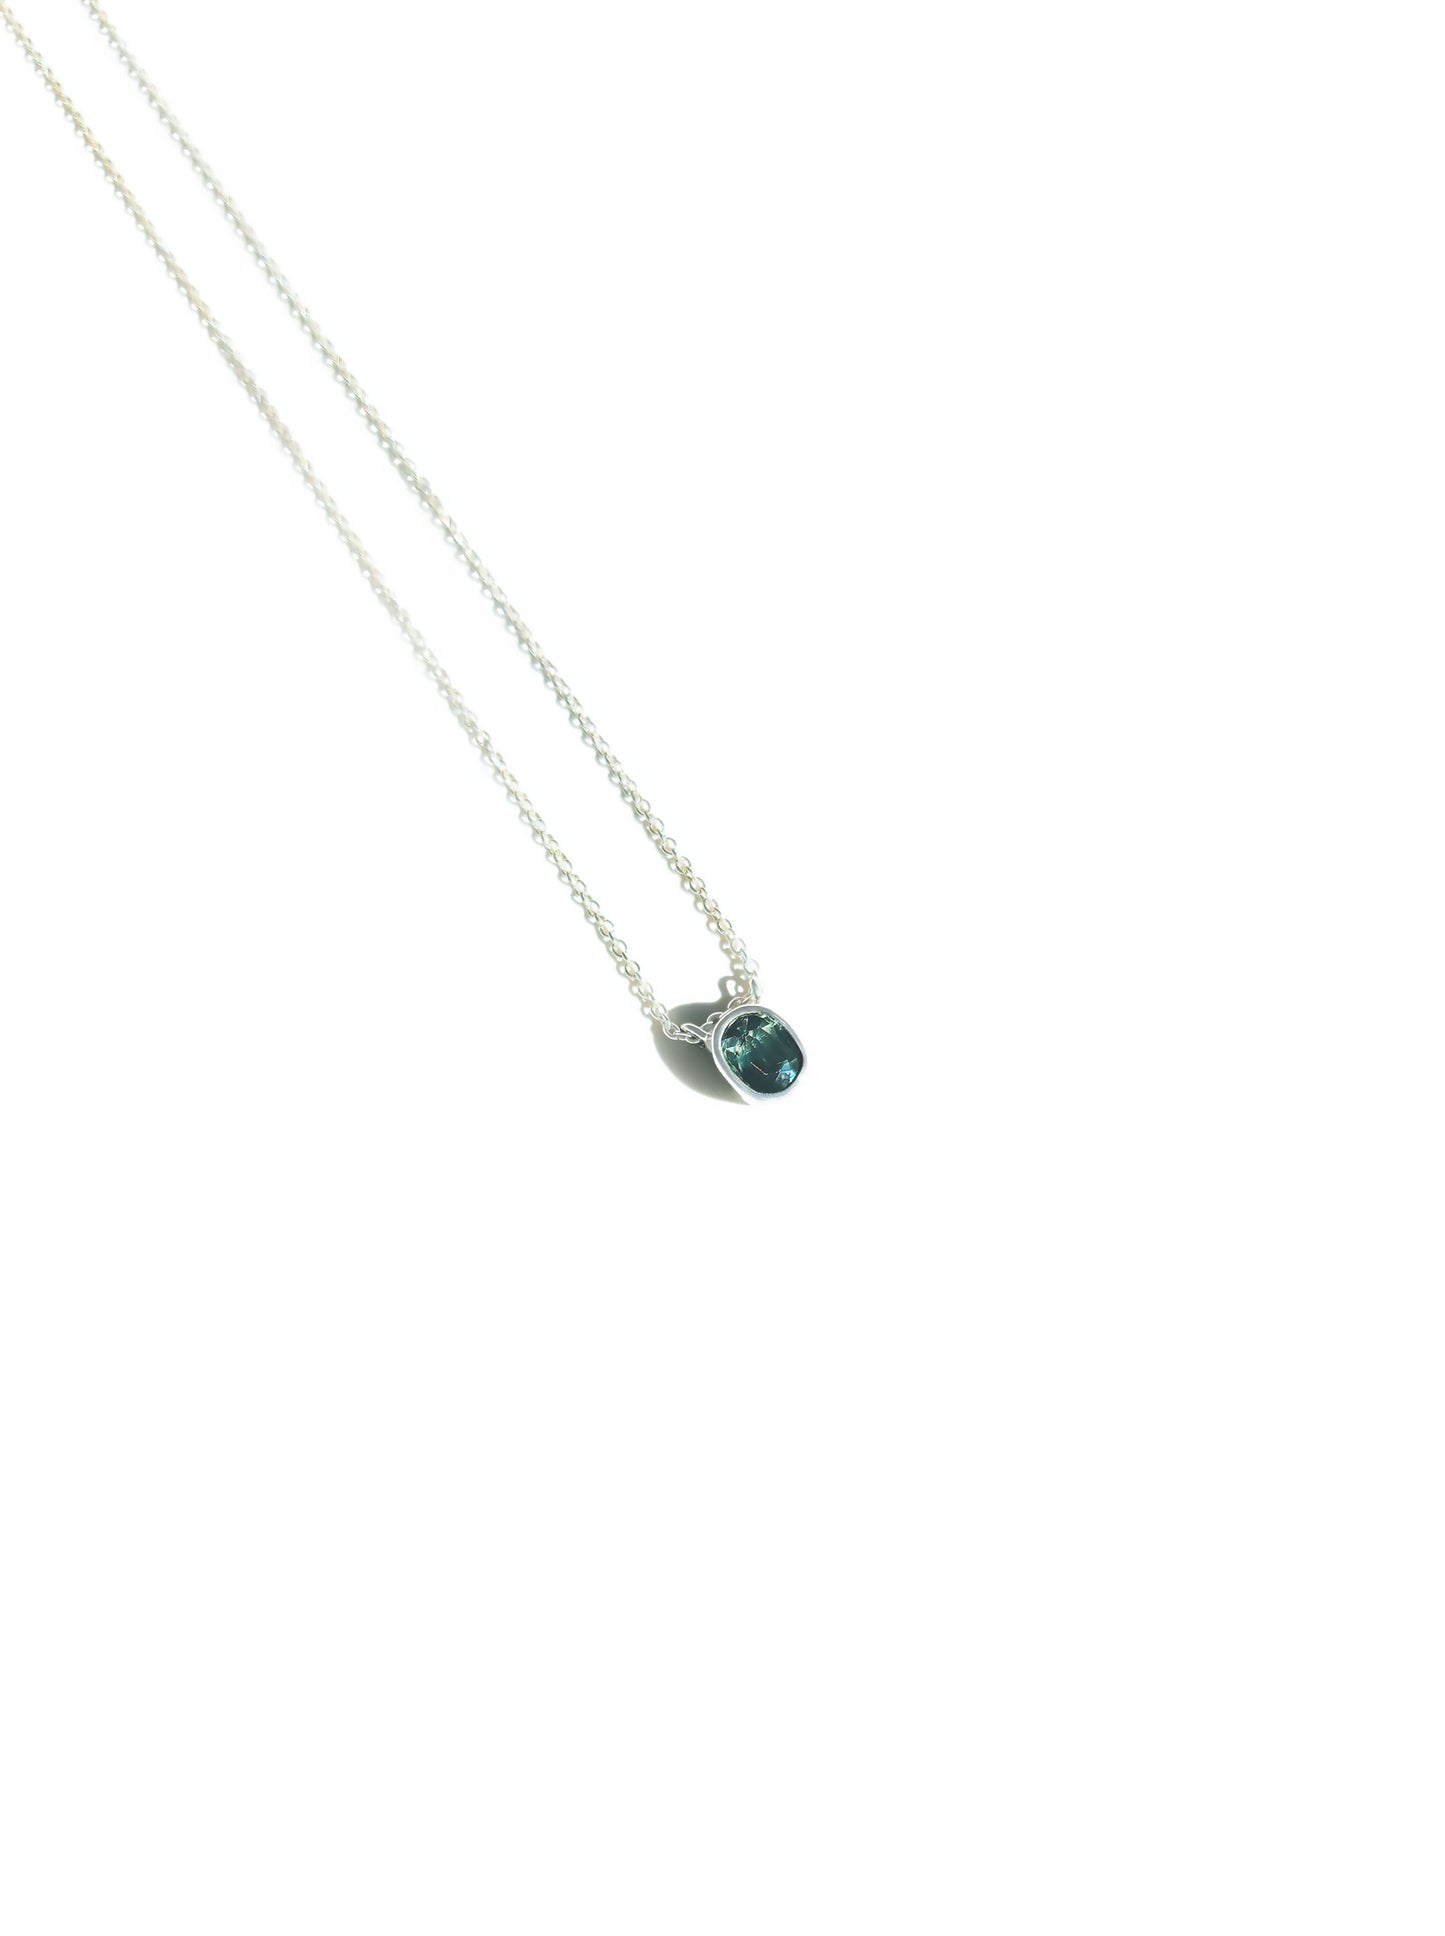 Small Faceted Oval Sapphire Necklace